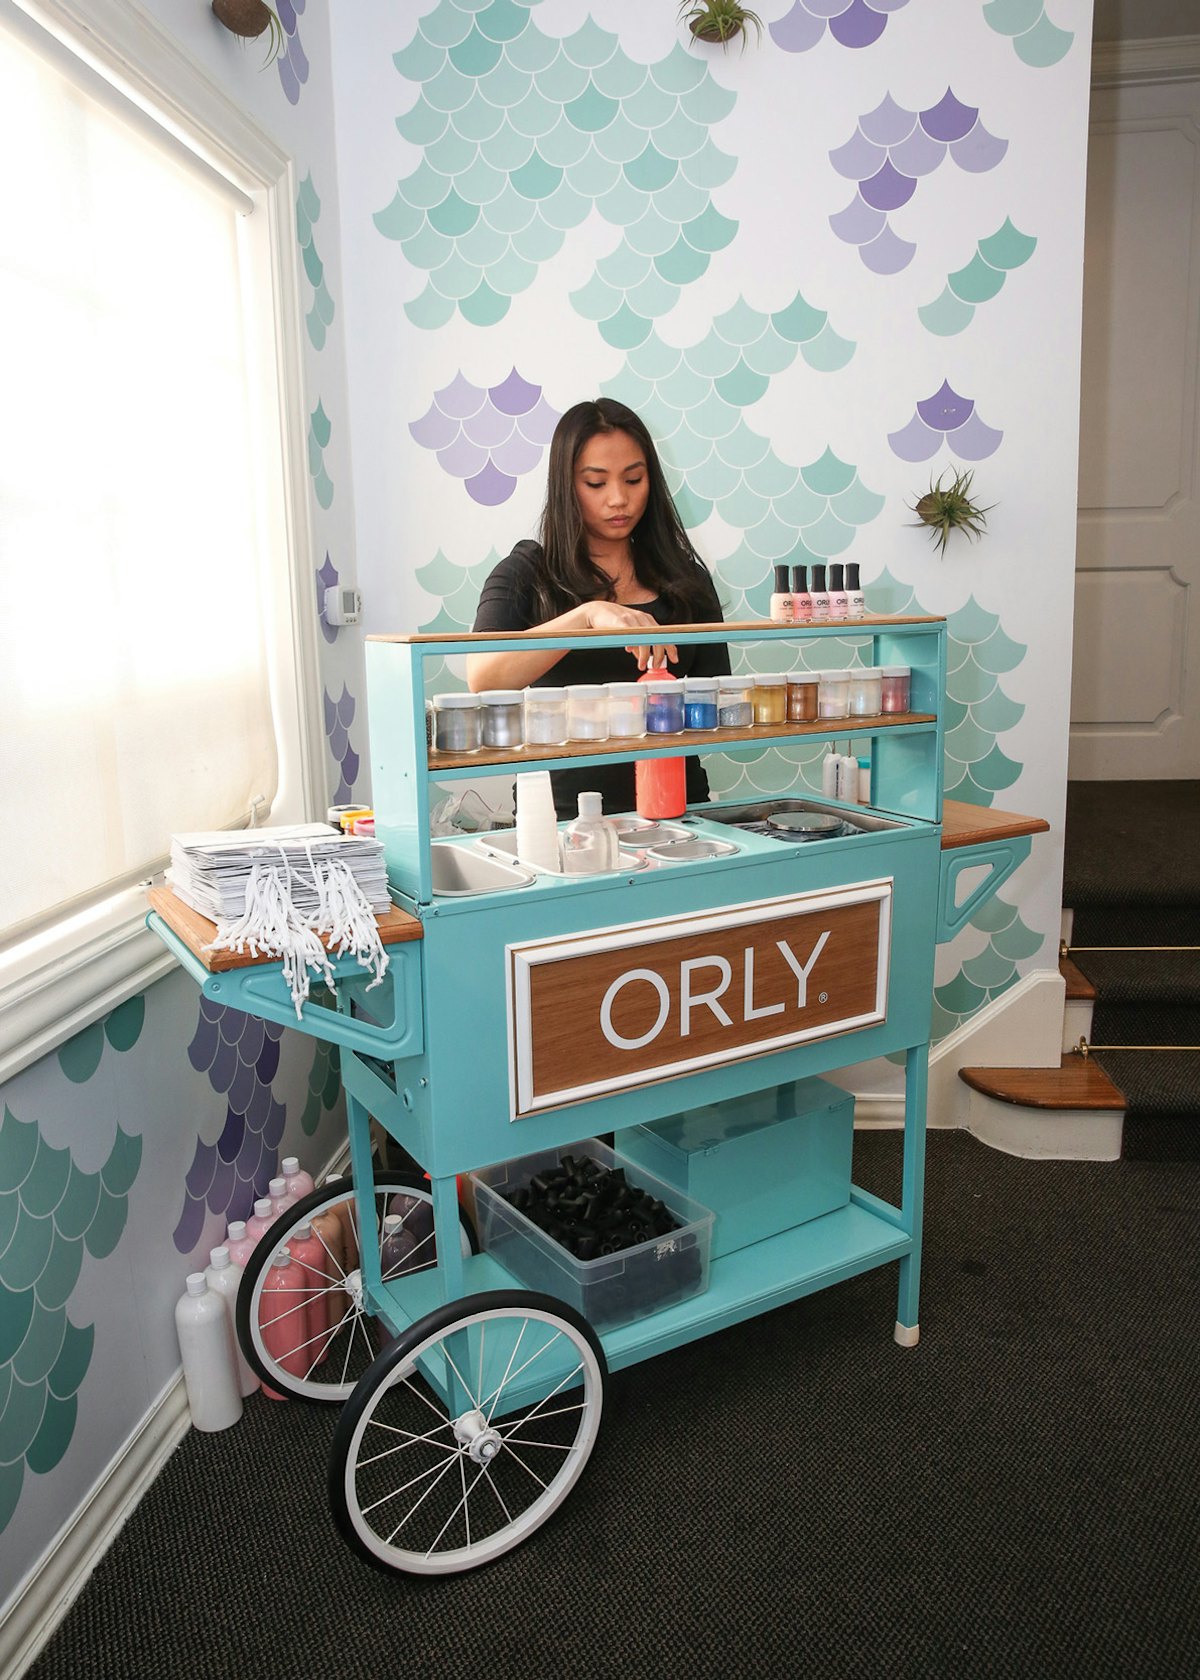 Orly Taps the Next Generation for | Nailpro Growth